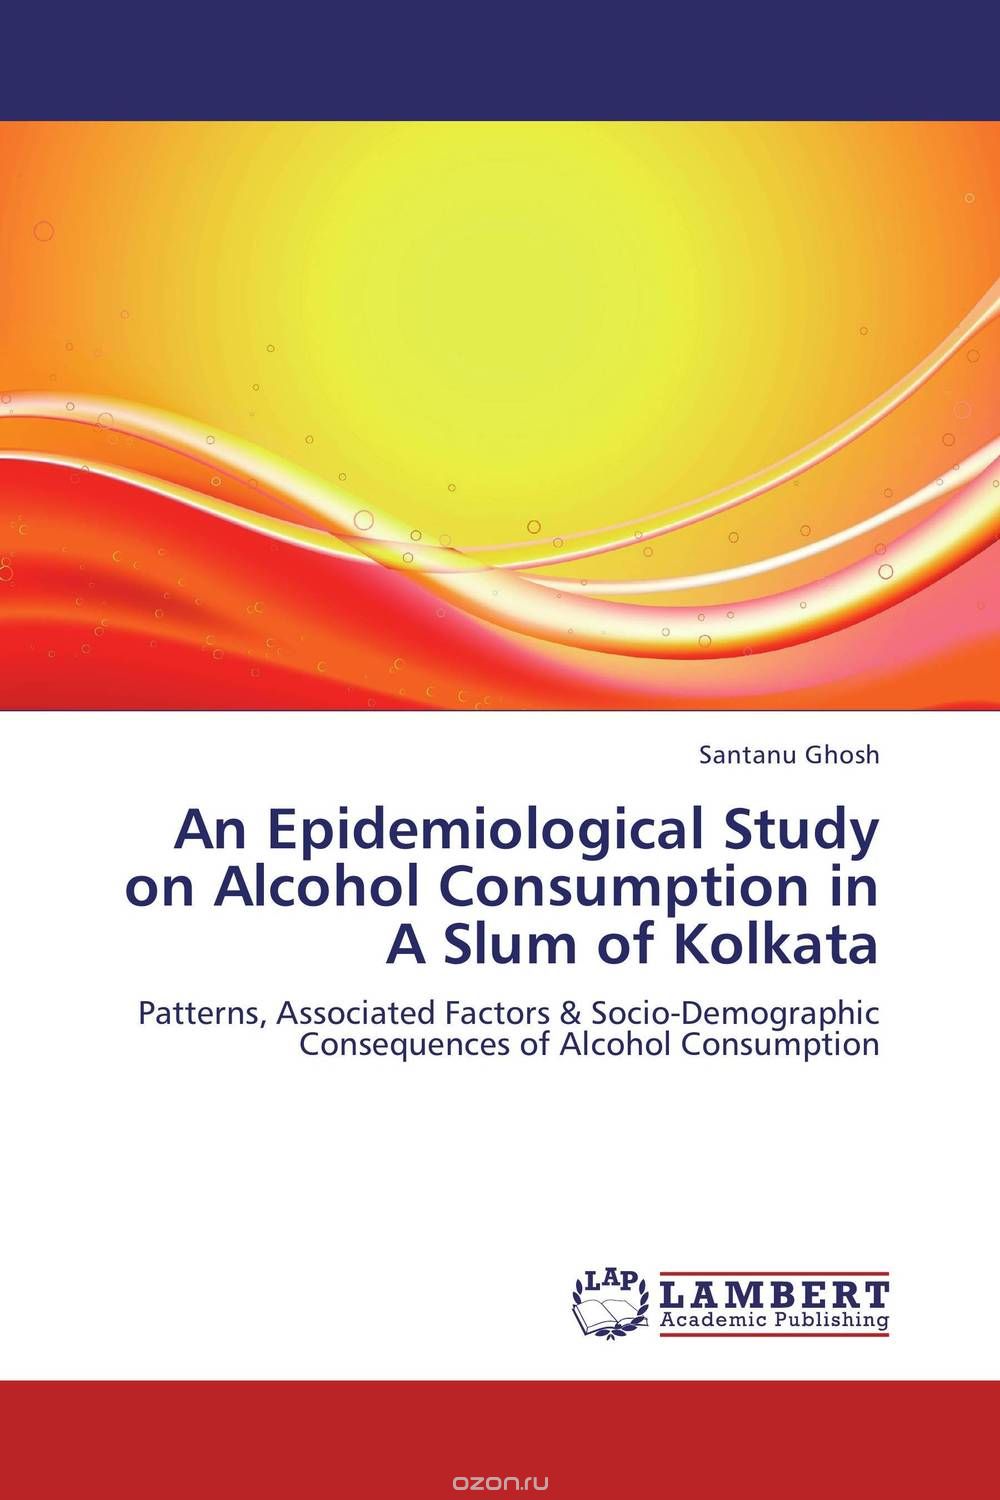 An Epidemiological Study on Alcohol Consumption in A Slum of Kolkata